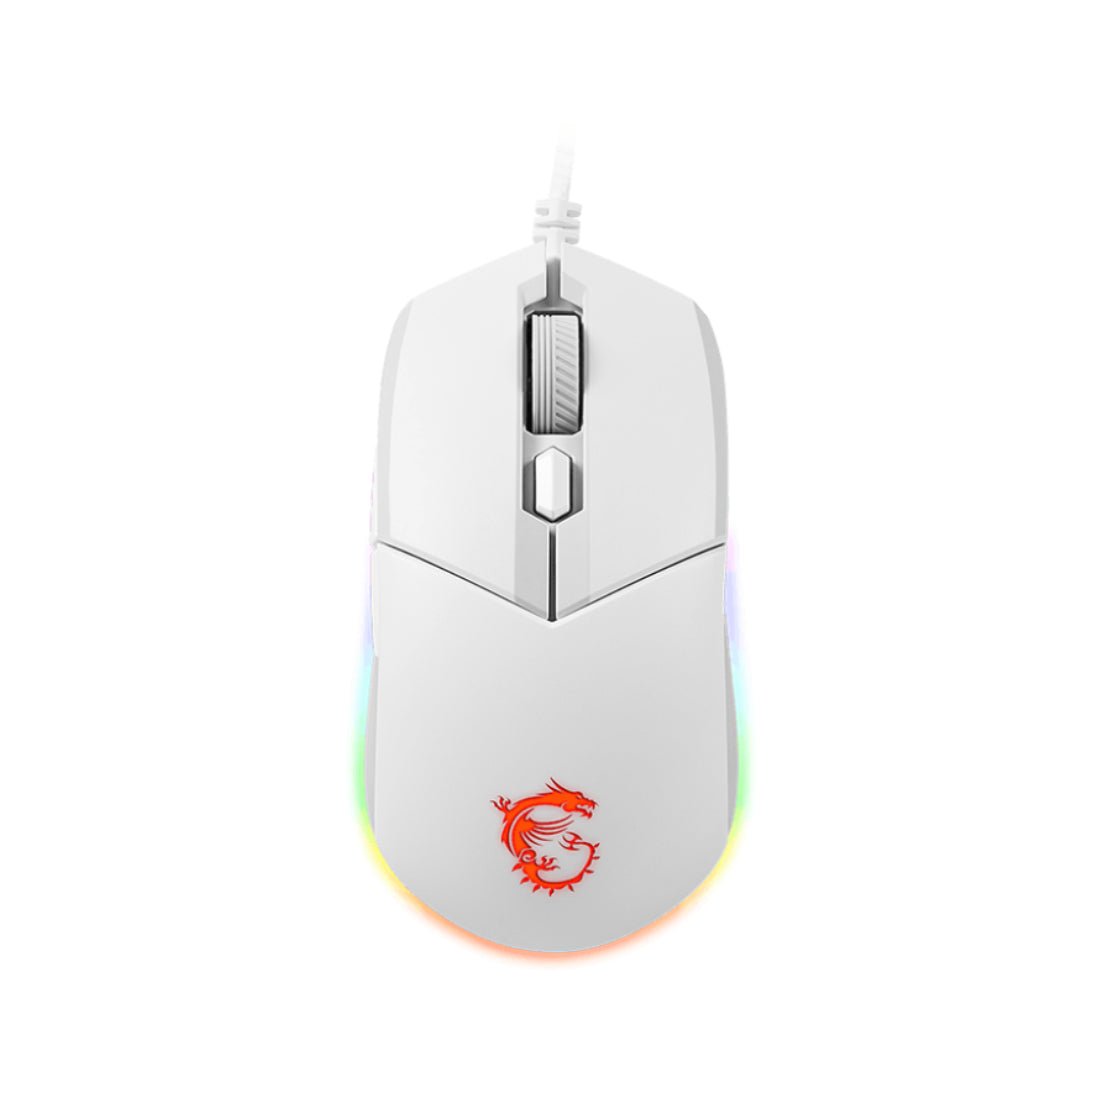 MSI Clutch GM11 Wired Gaming Mouse - White  - فأرة - Store 974 | ستور ٩٧٤